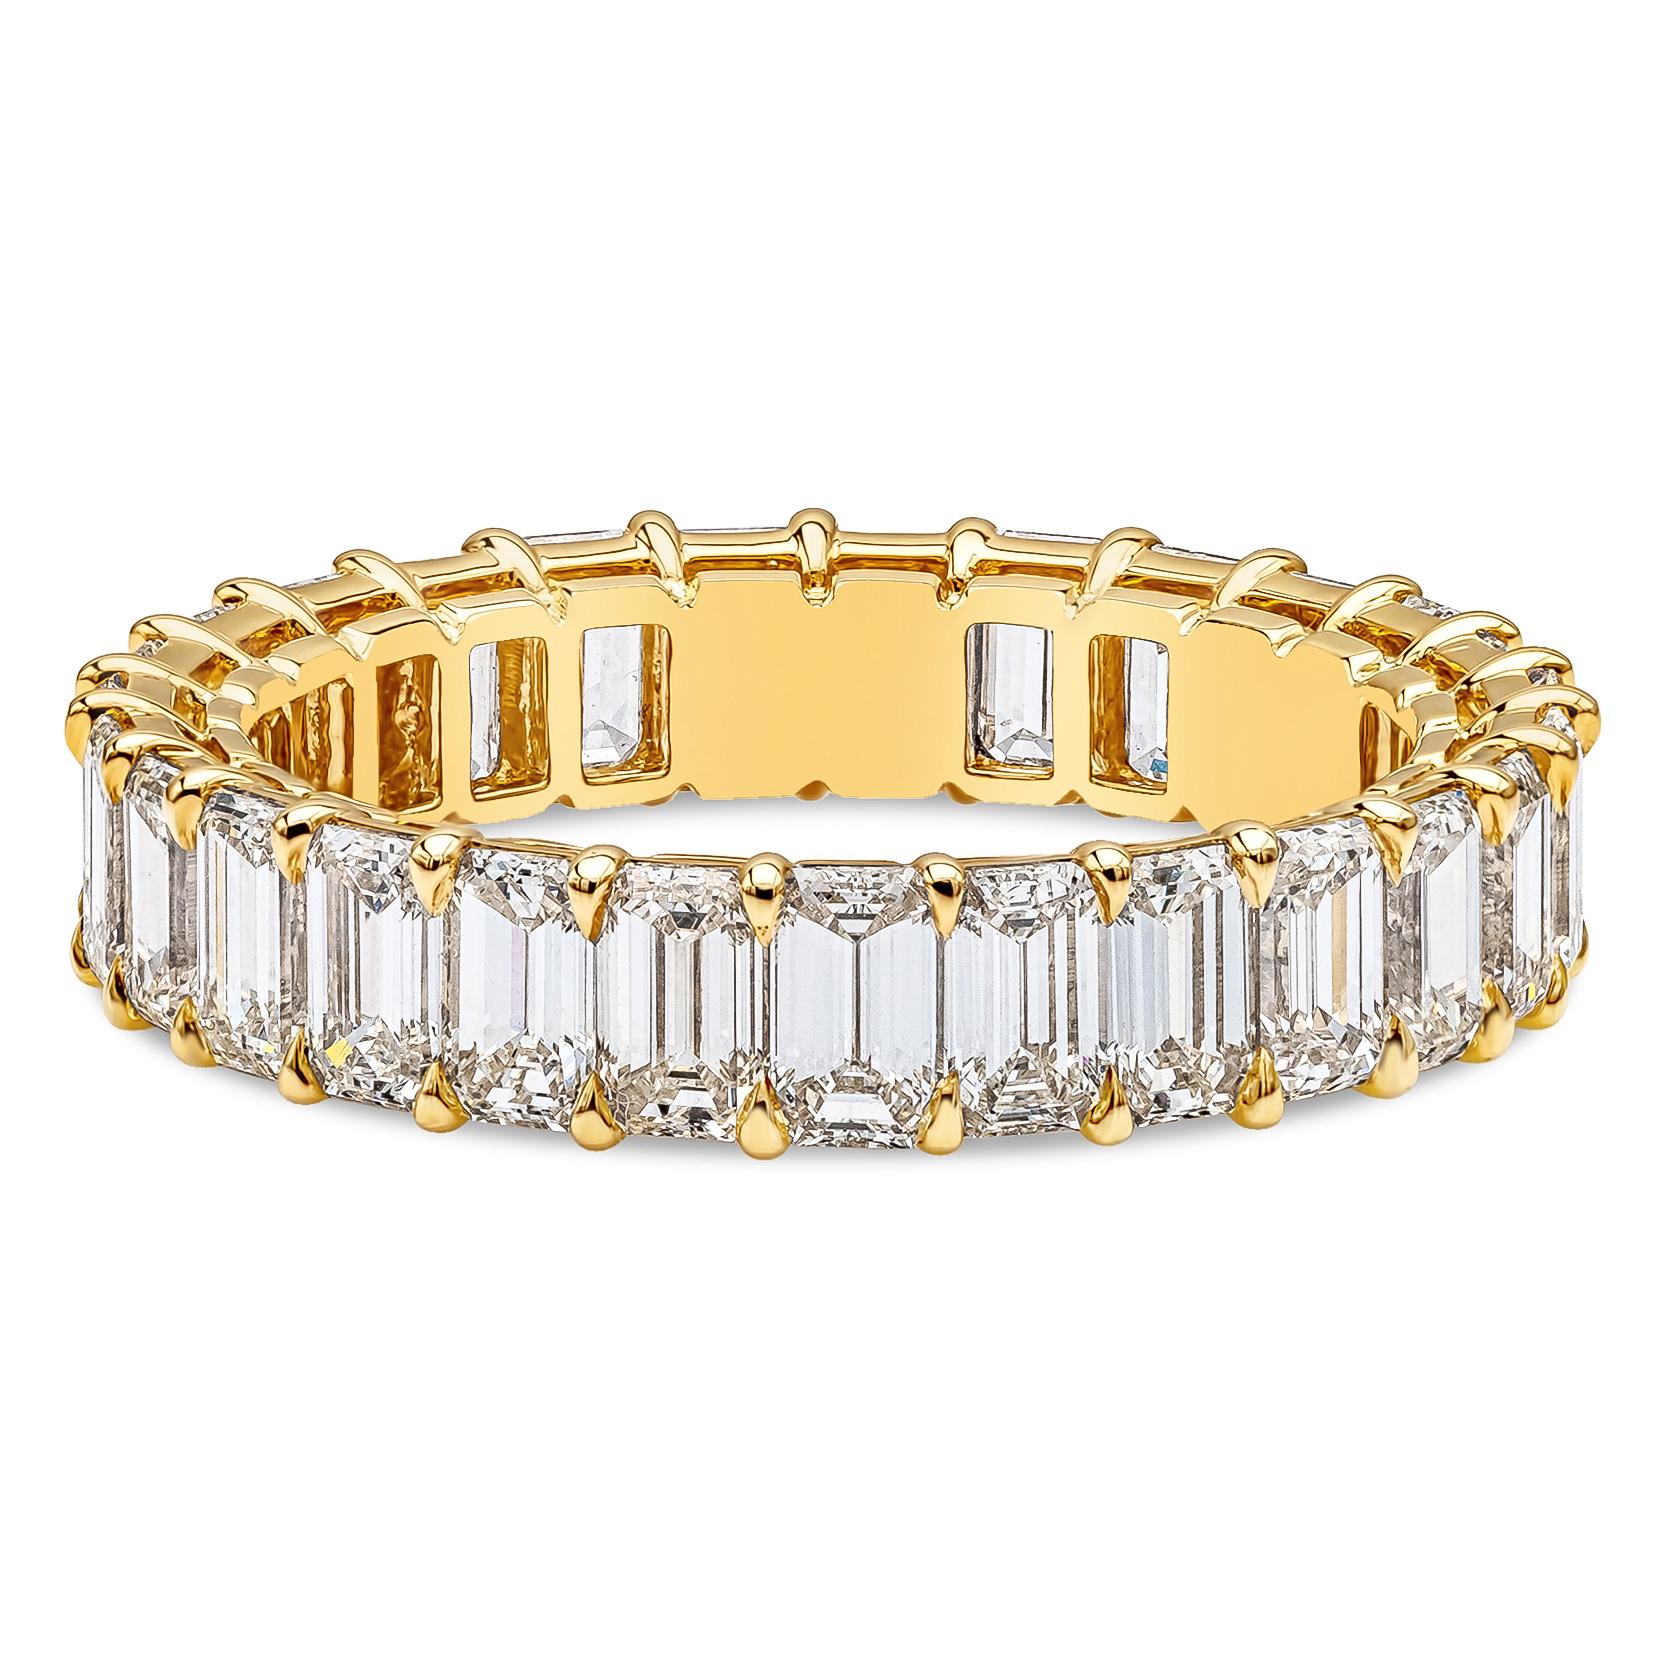 A classic eternity wedding band style featuring a row of emerald cut diamond weighing 4.12 carats, H Color and VS-VVS in Clarity. Set in shared-prong mounting, Made with 18K Yellow Gold. Size 6.5 US

Style available in different price ranges. Prices